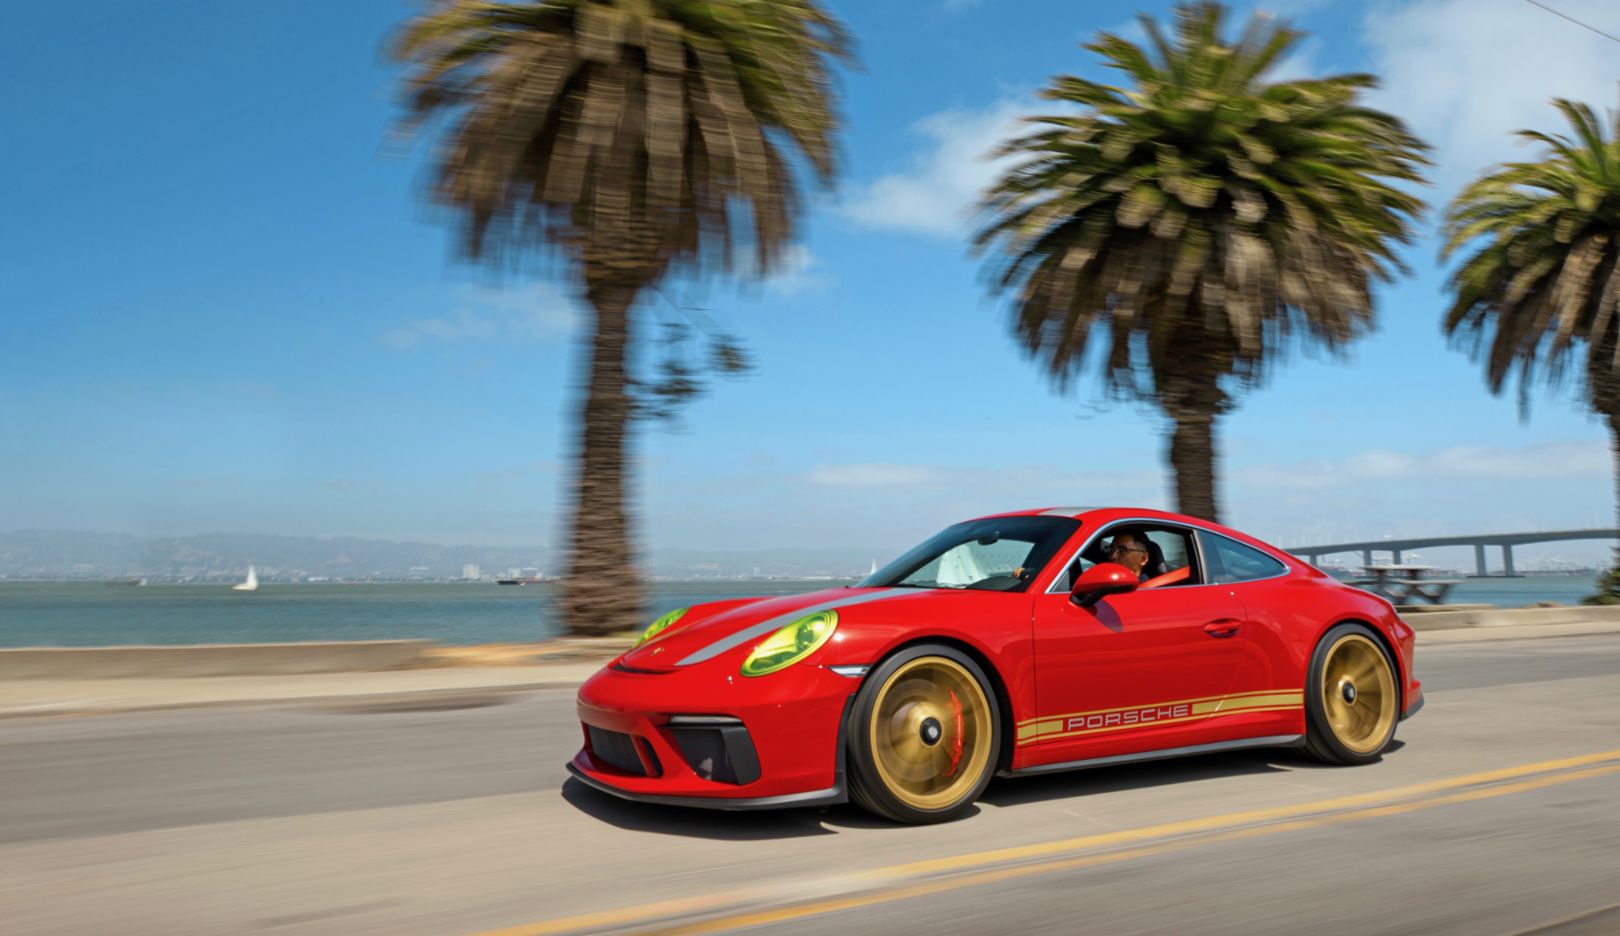 Daniel Wu’s fleet now also includes a Porsche 911 GT3 Touring built in 2018. With its unique paintwork, the sports car soon attracts attention on the streets of San Francisco. 